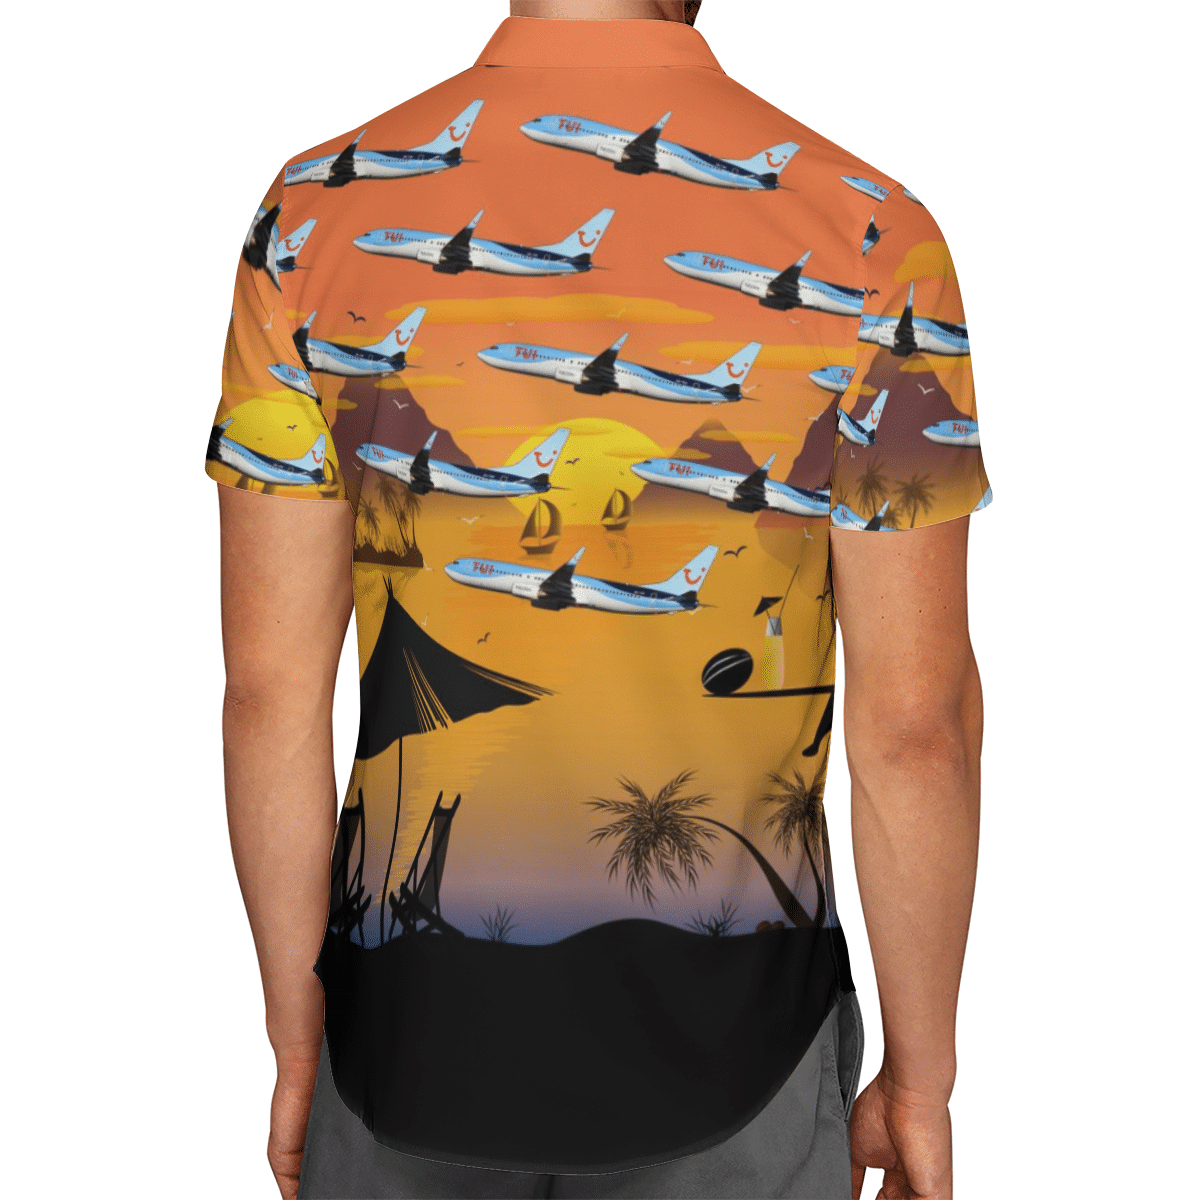 Going to the beach with a quality shirt 16